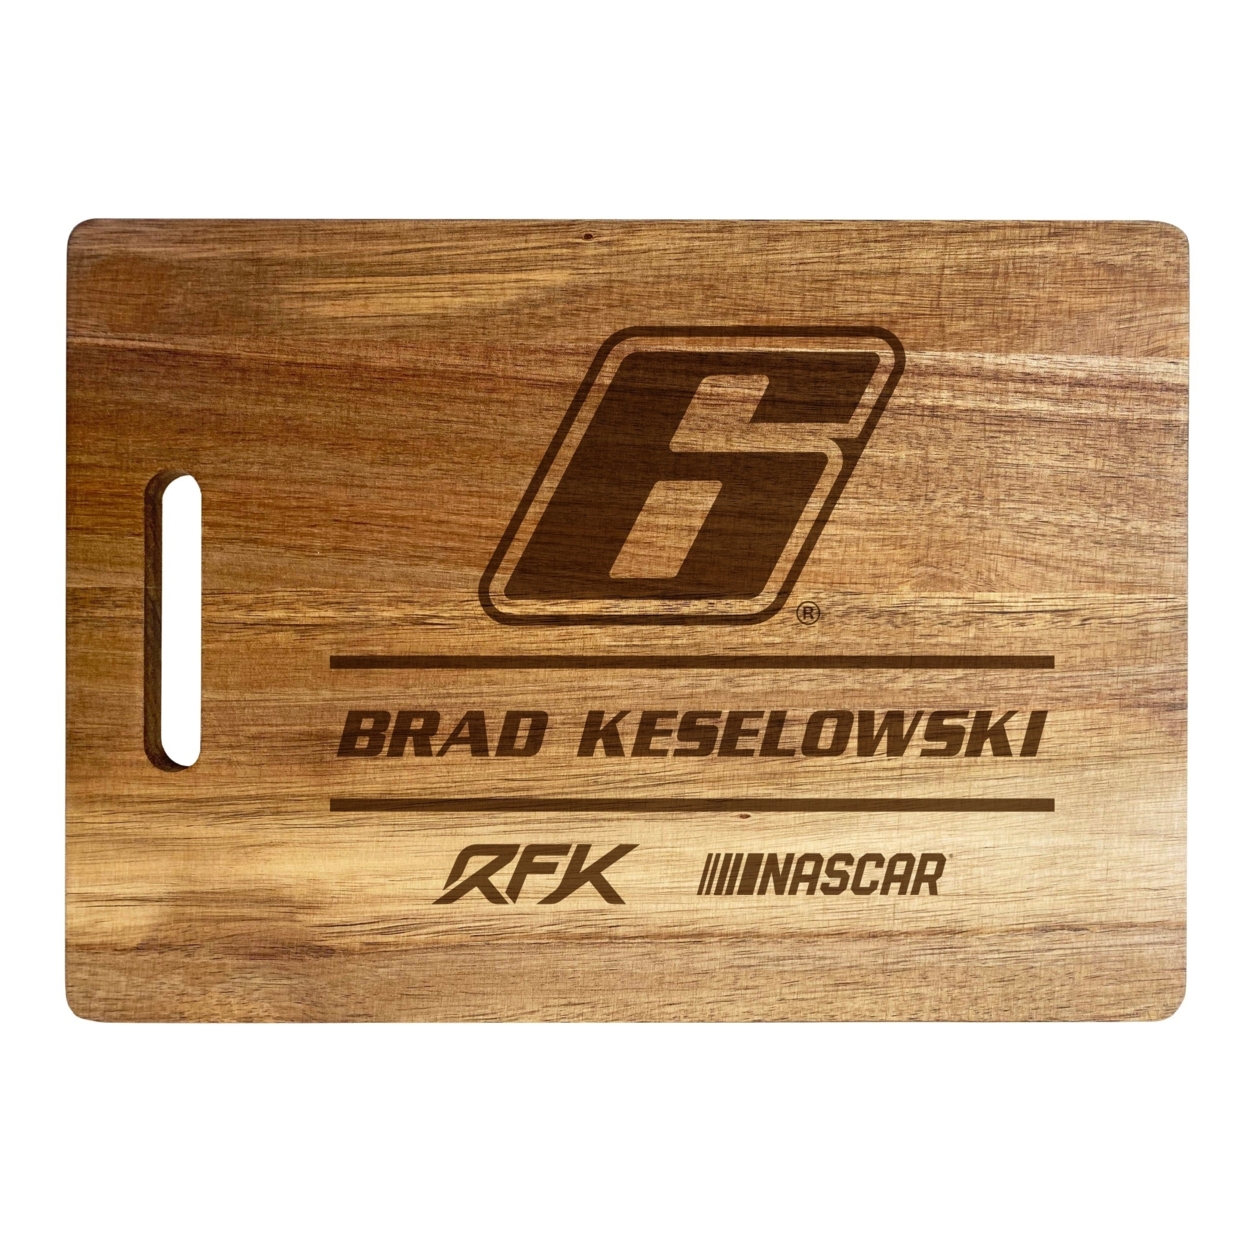 #6 Brad Kesewloski NASCAR Officially Licensed Engraved Wooden Cutting Board